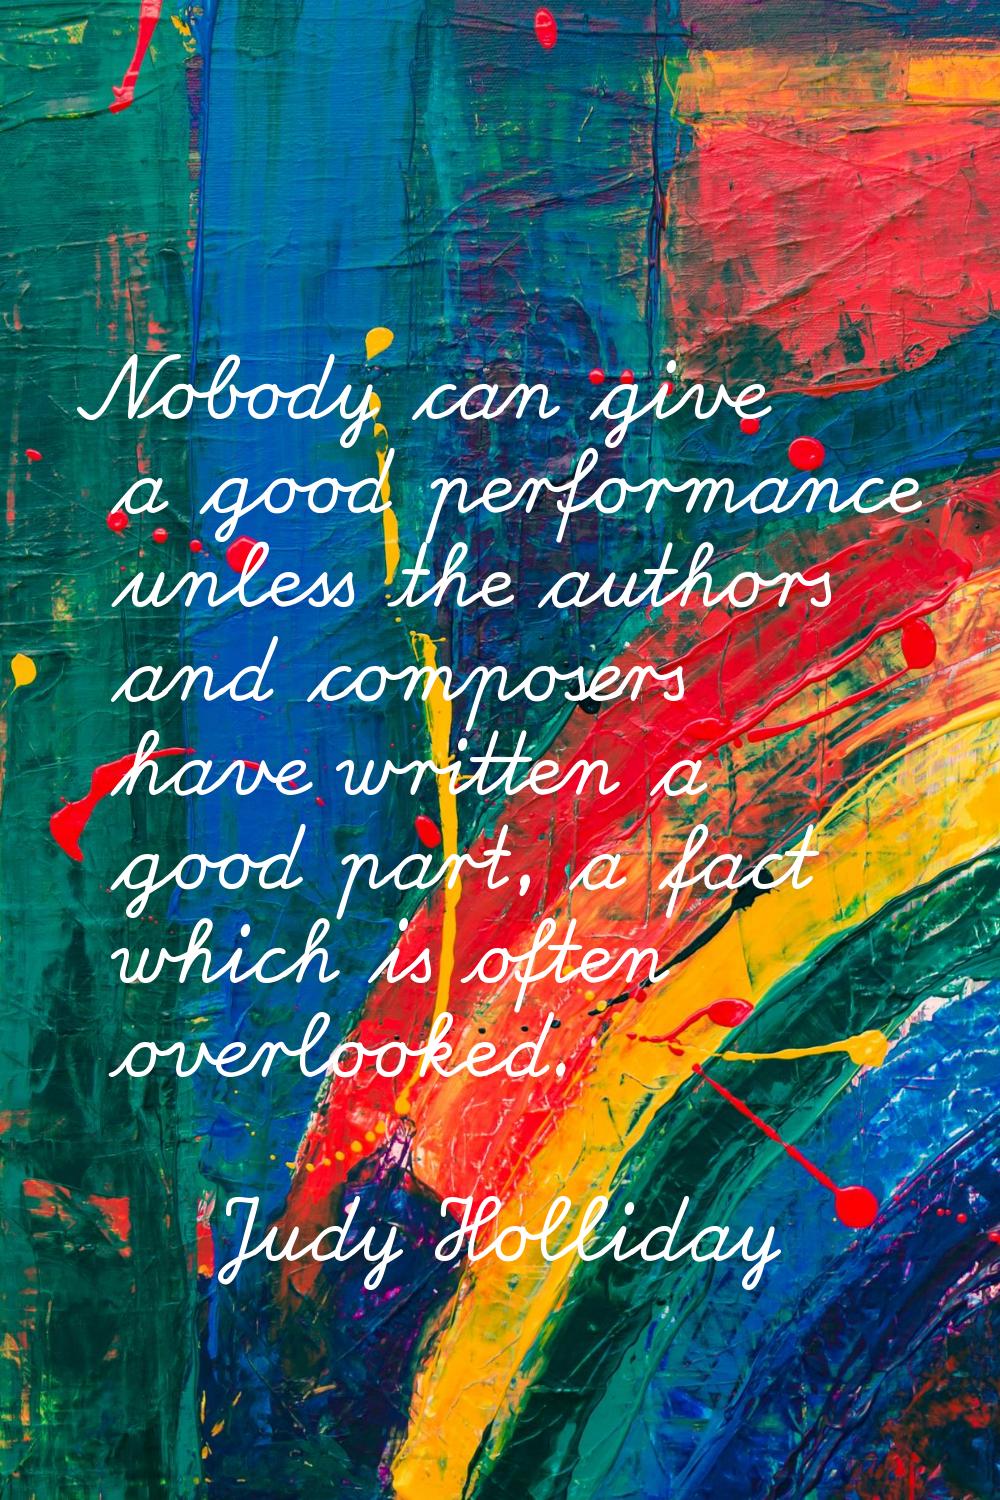 Nobody can give a good performance unless the authors and composers have written a good part, a fac